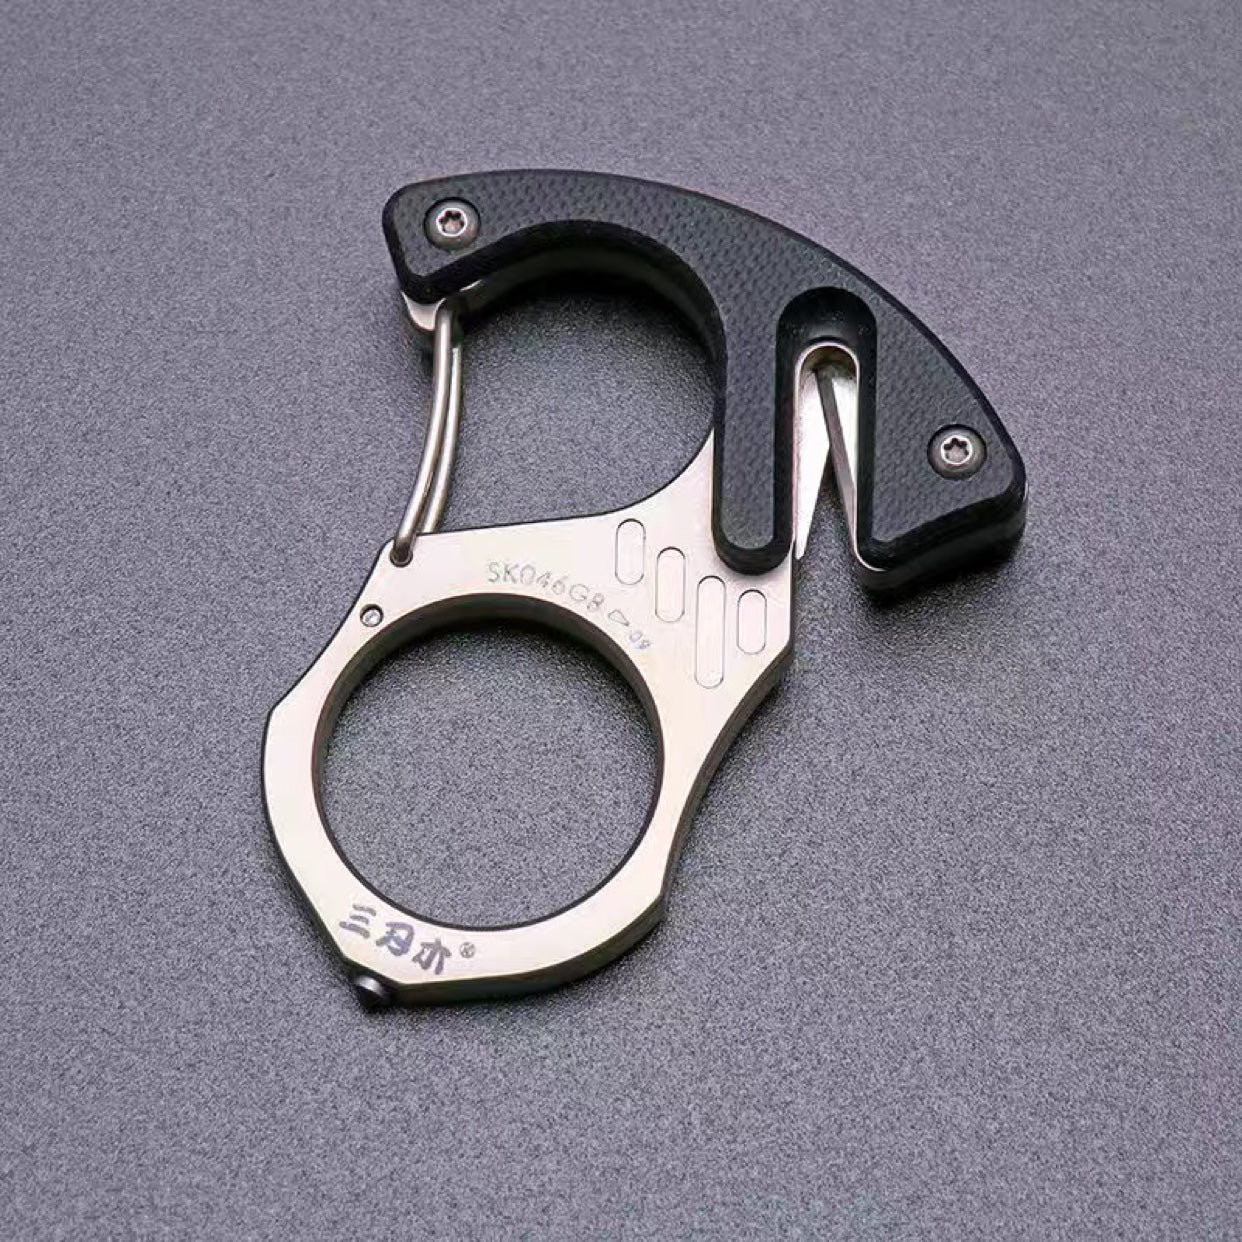 Stainless Steel Multifunctional Keychain Self Defense Tool - Keychains -  Trend Goods